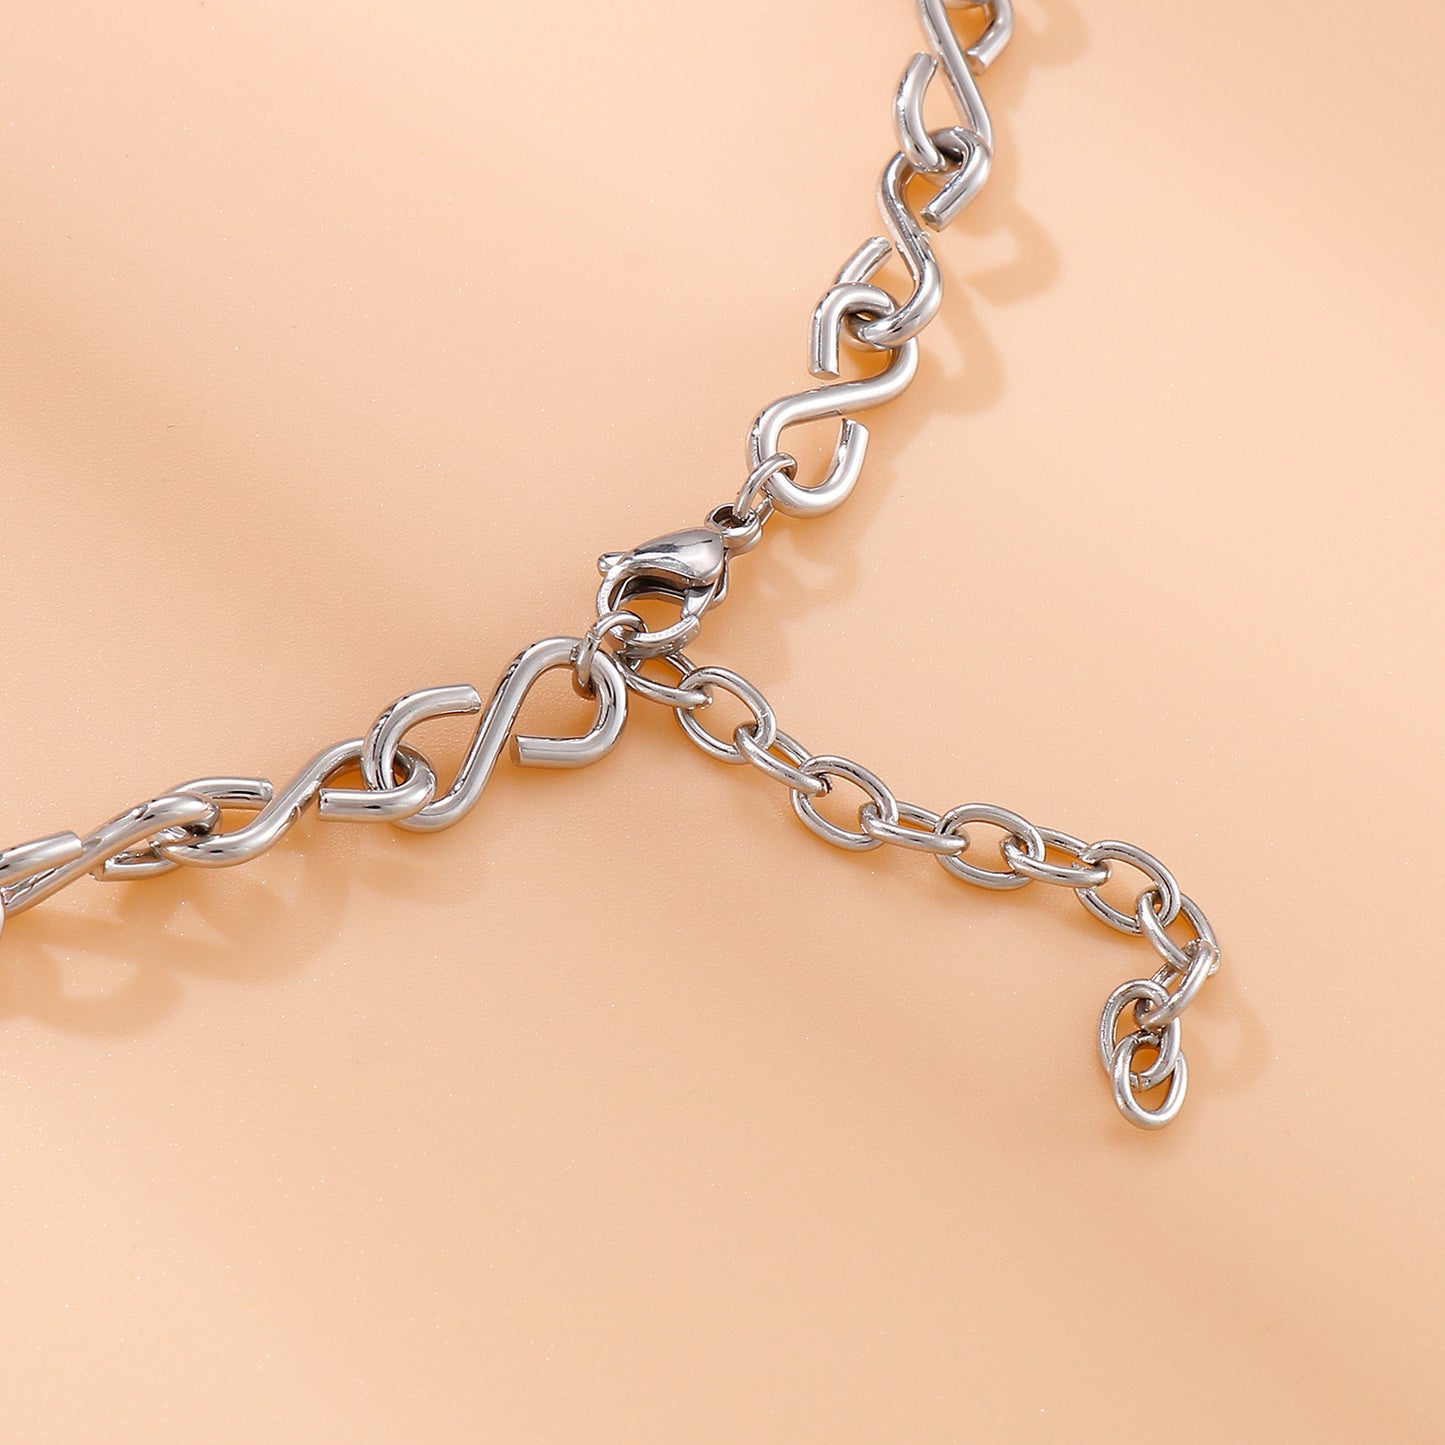 Elegant Stainless Steel Lobster Closure Chain Necklace